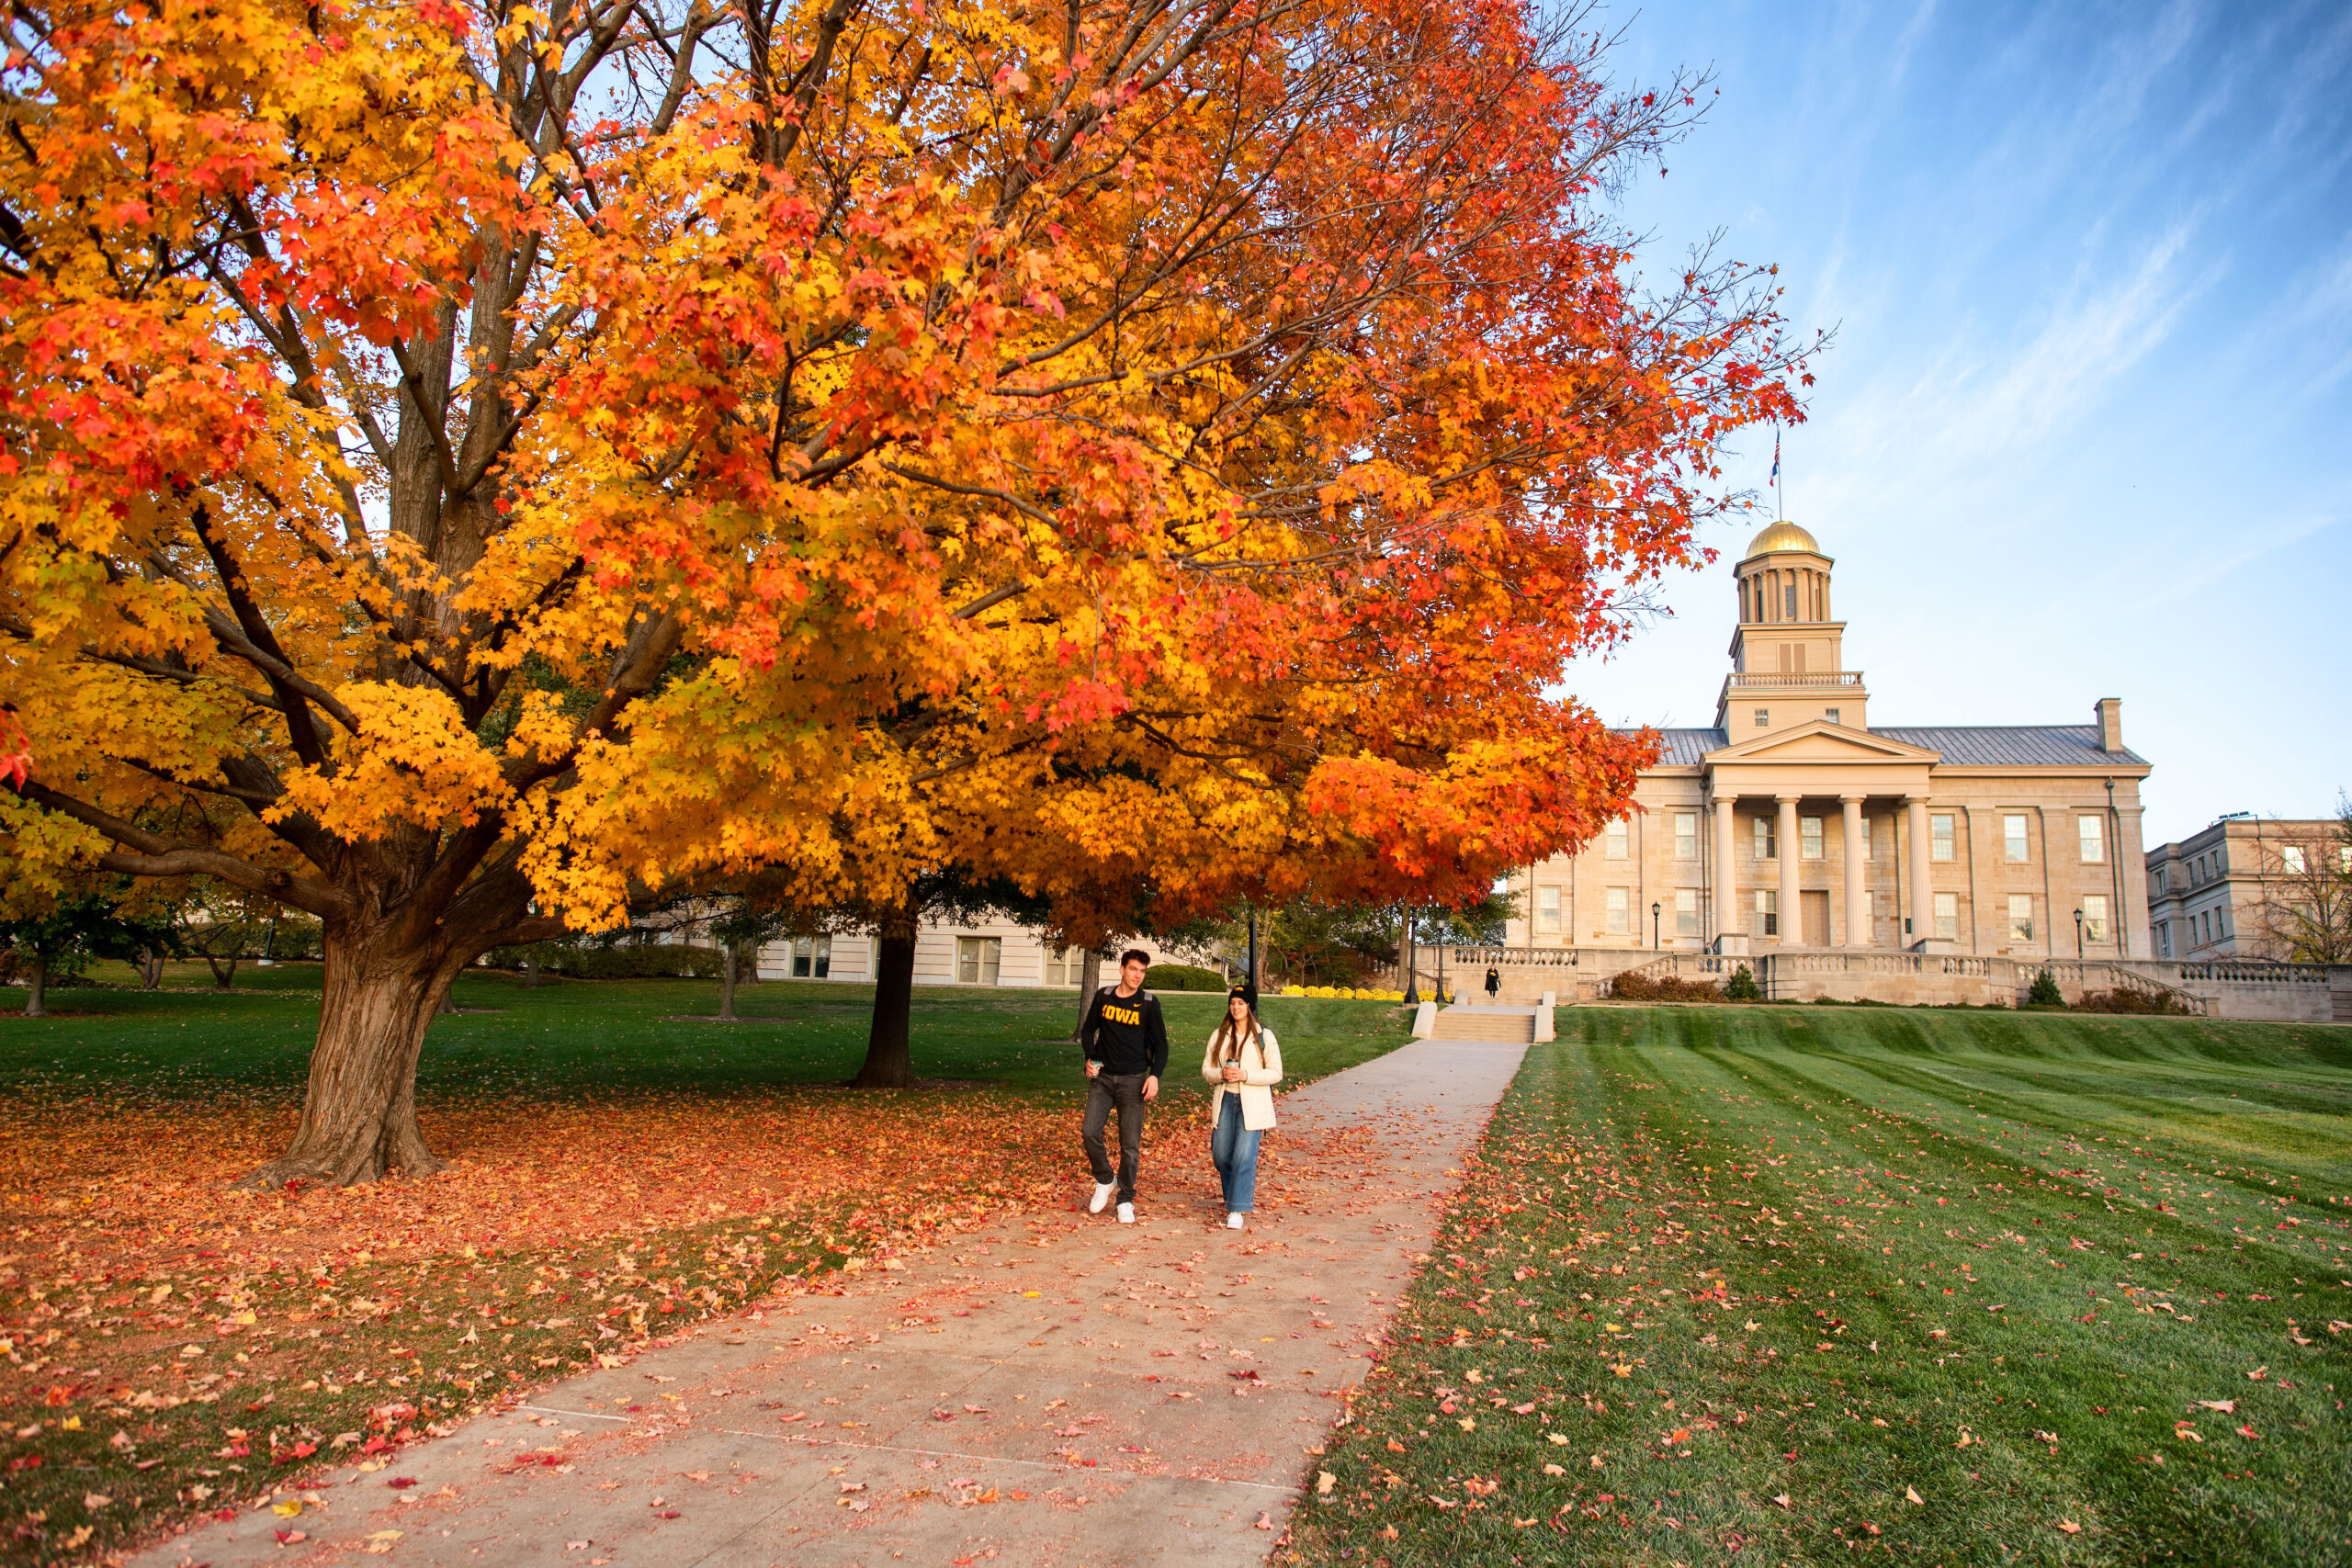 Students walking under a tree with autumn leaves in front of the Old Capitol.